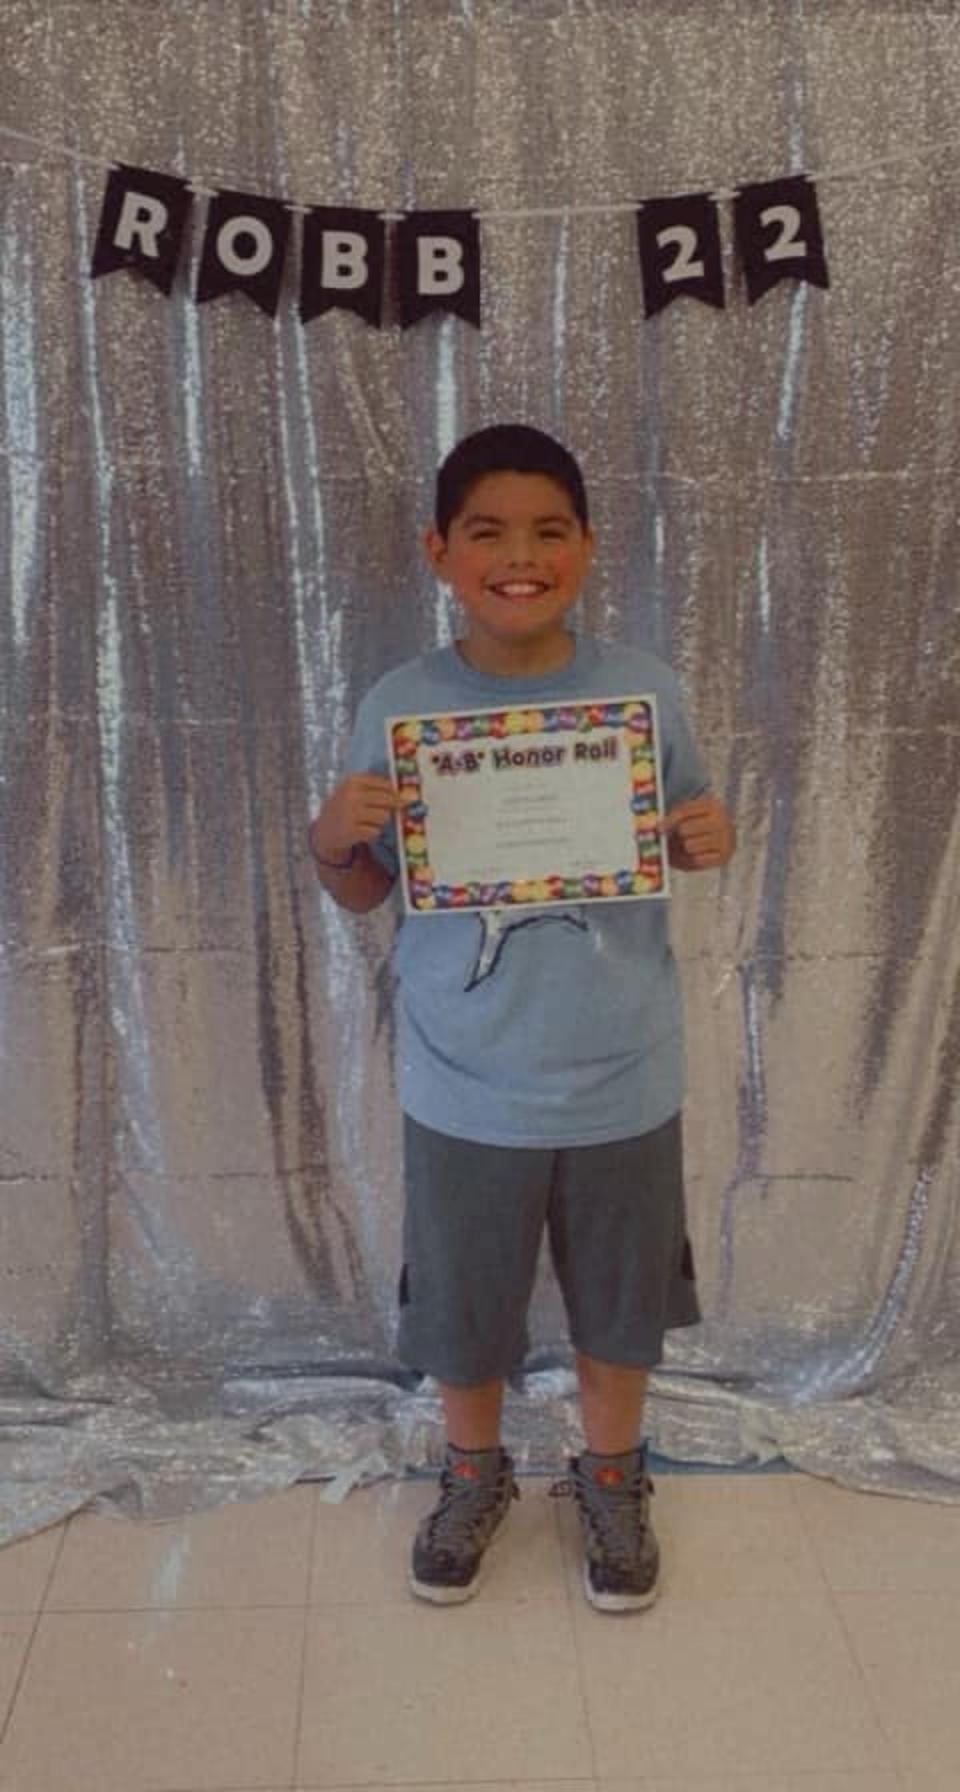 Jose Flores received an award for making the honour roll hours before shooting, his uncle said (Family/Facebook)